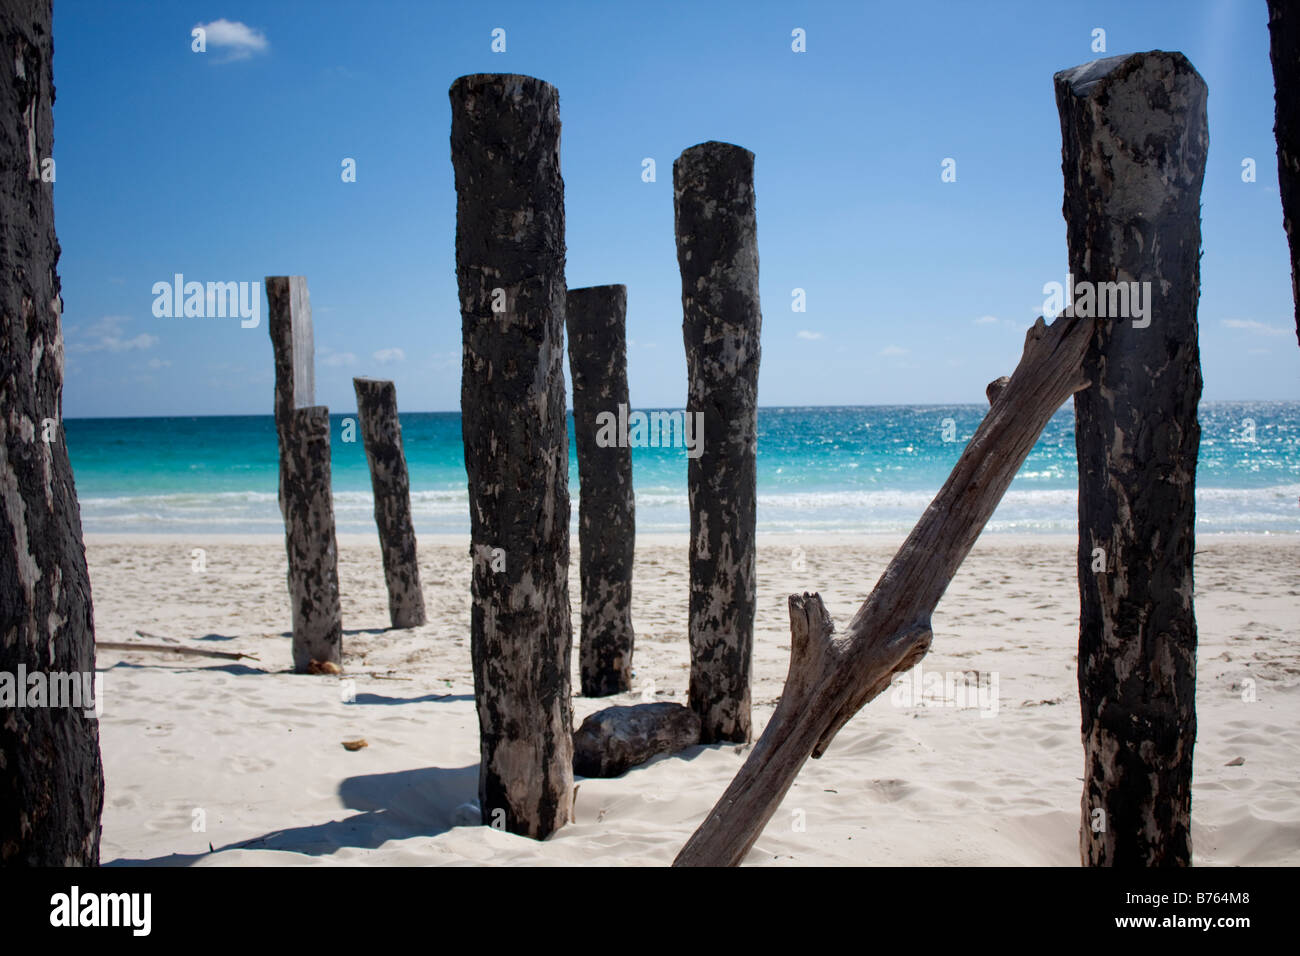 Posts from an old pier in Mexico Stock Photo